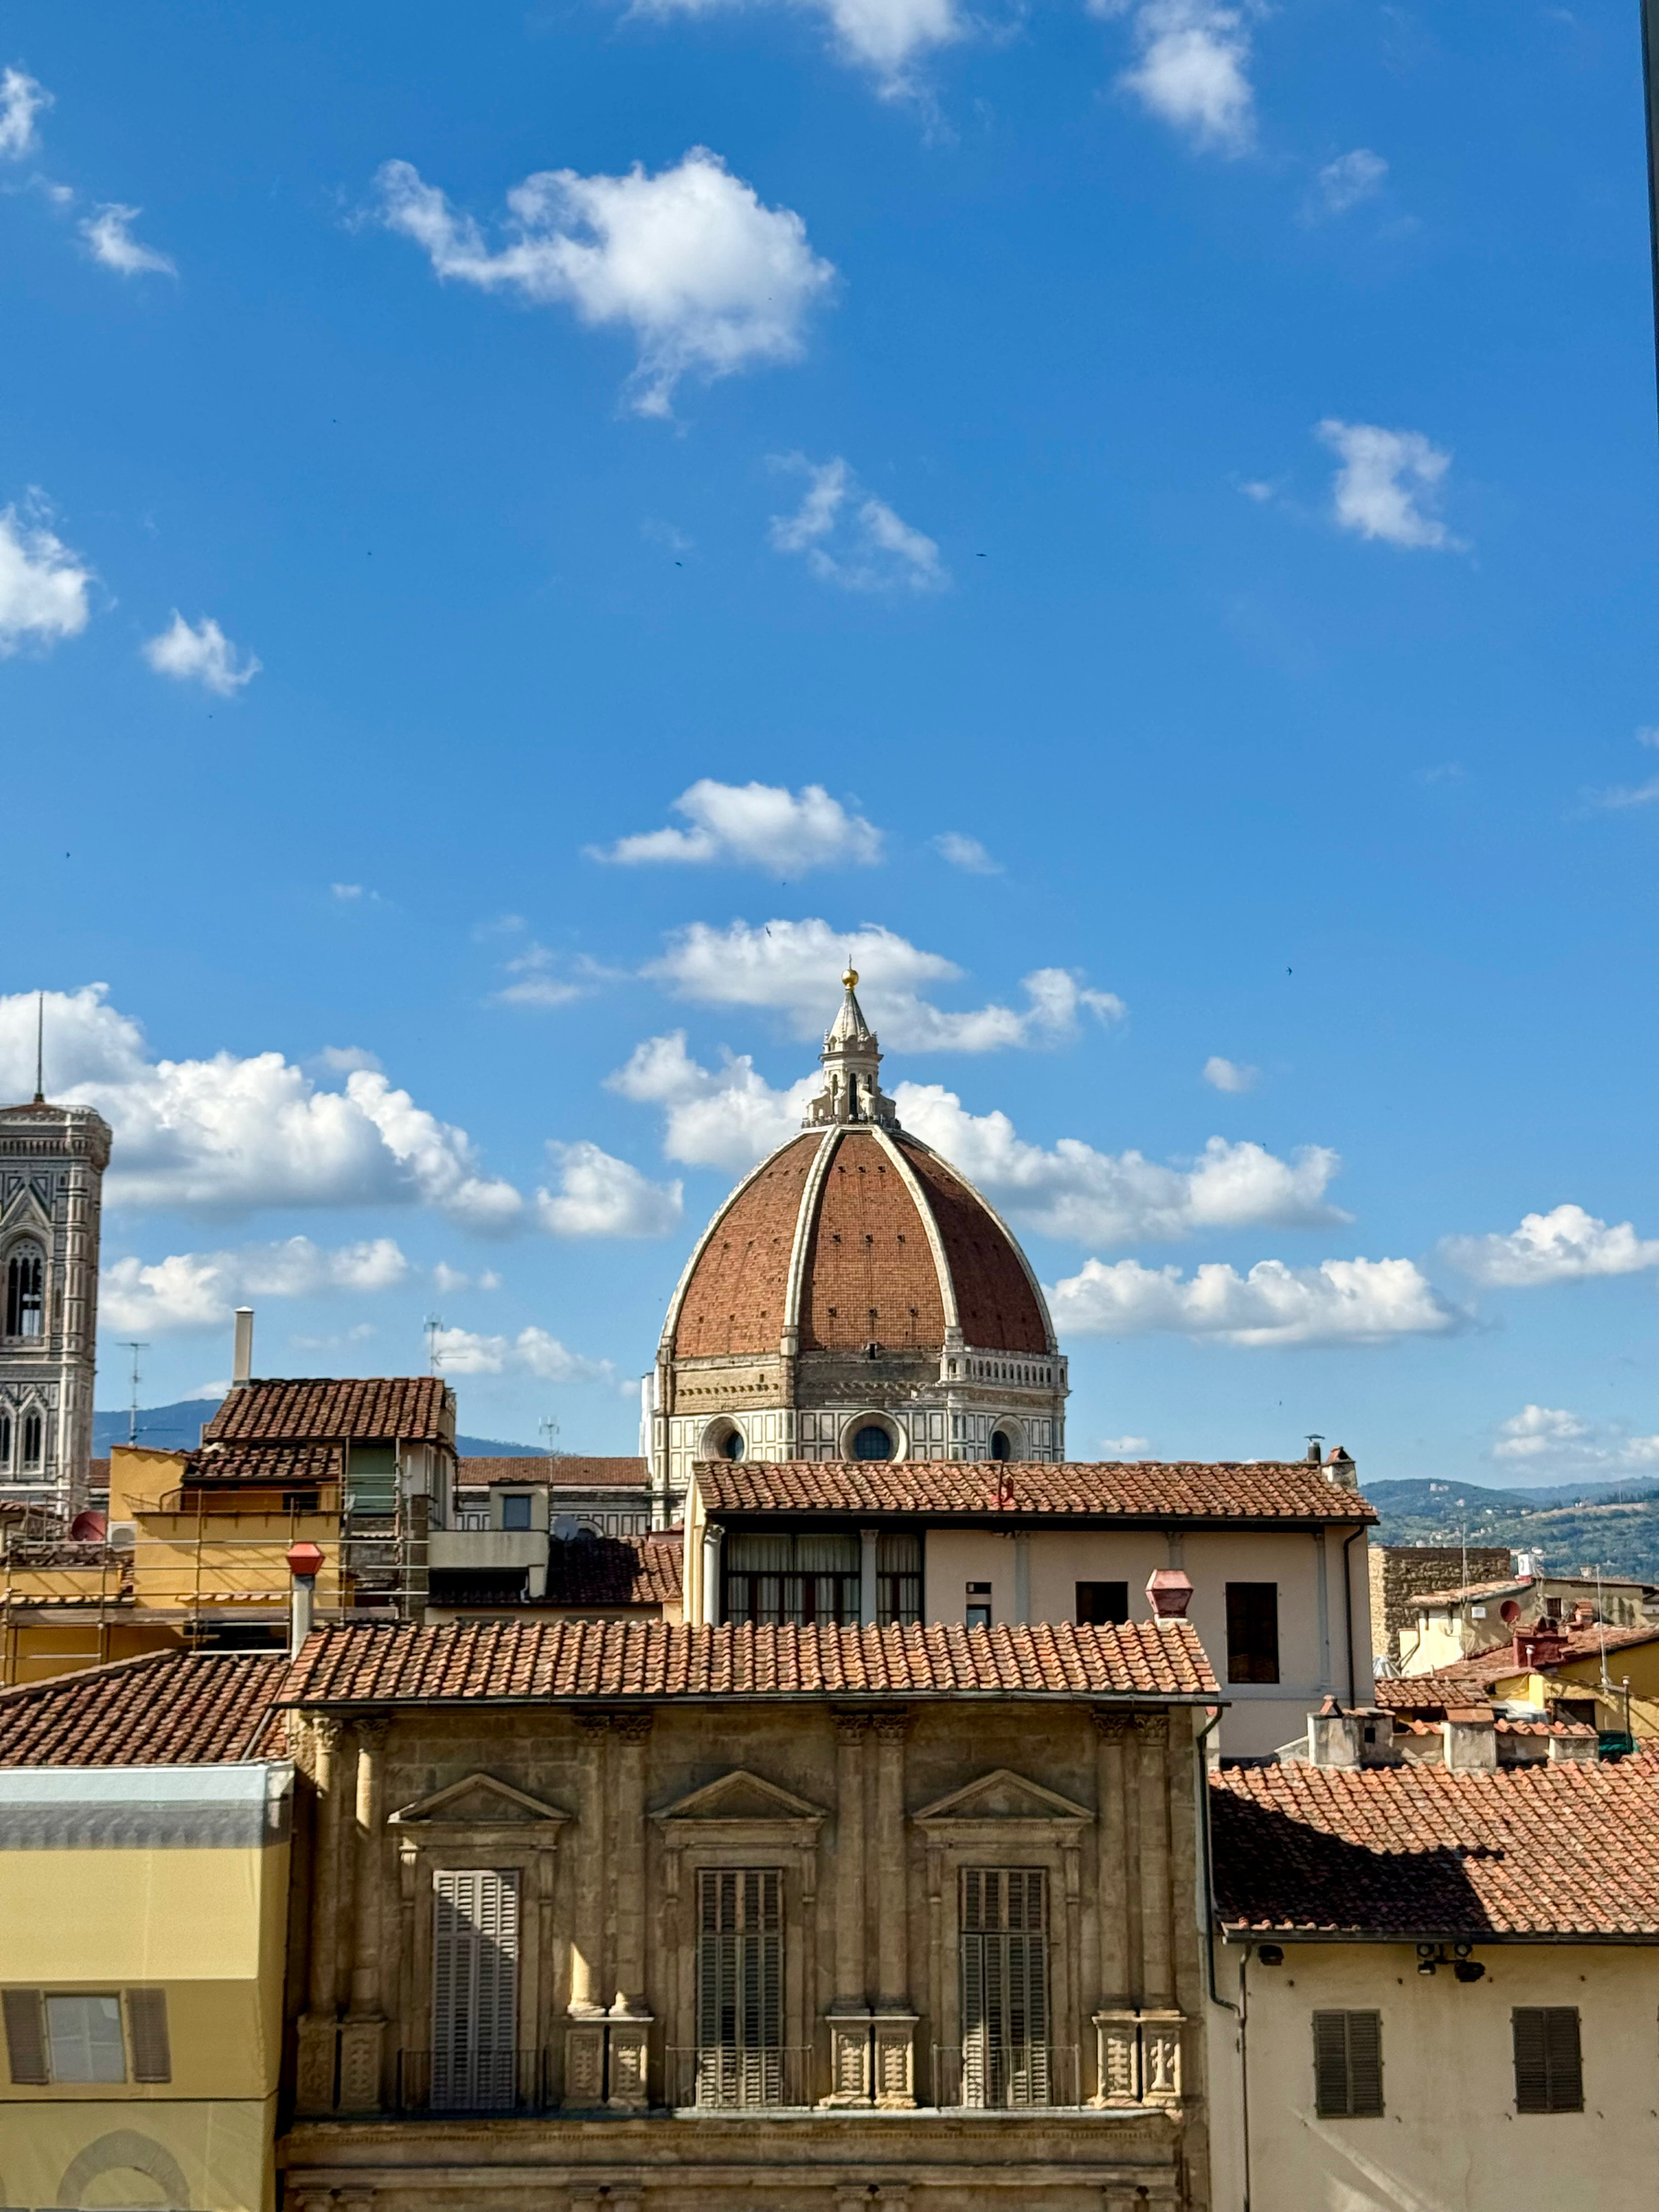 A cityscape featuring the dome of the Florence Cathedral (Duomo di Firenze) in the center, with surrounding historic buildings and rooftops. The sky above is blue with scattered clouds.